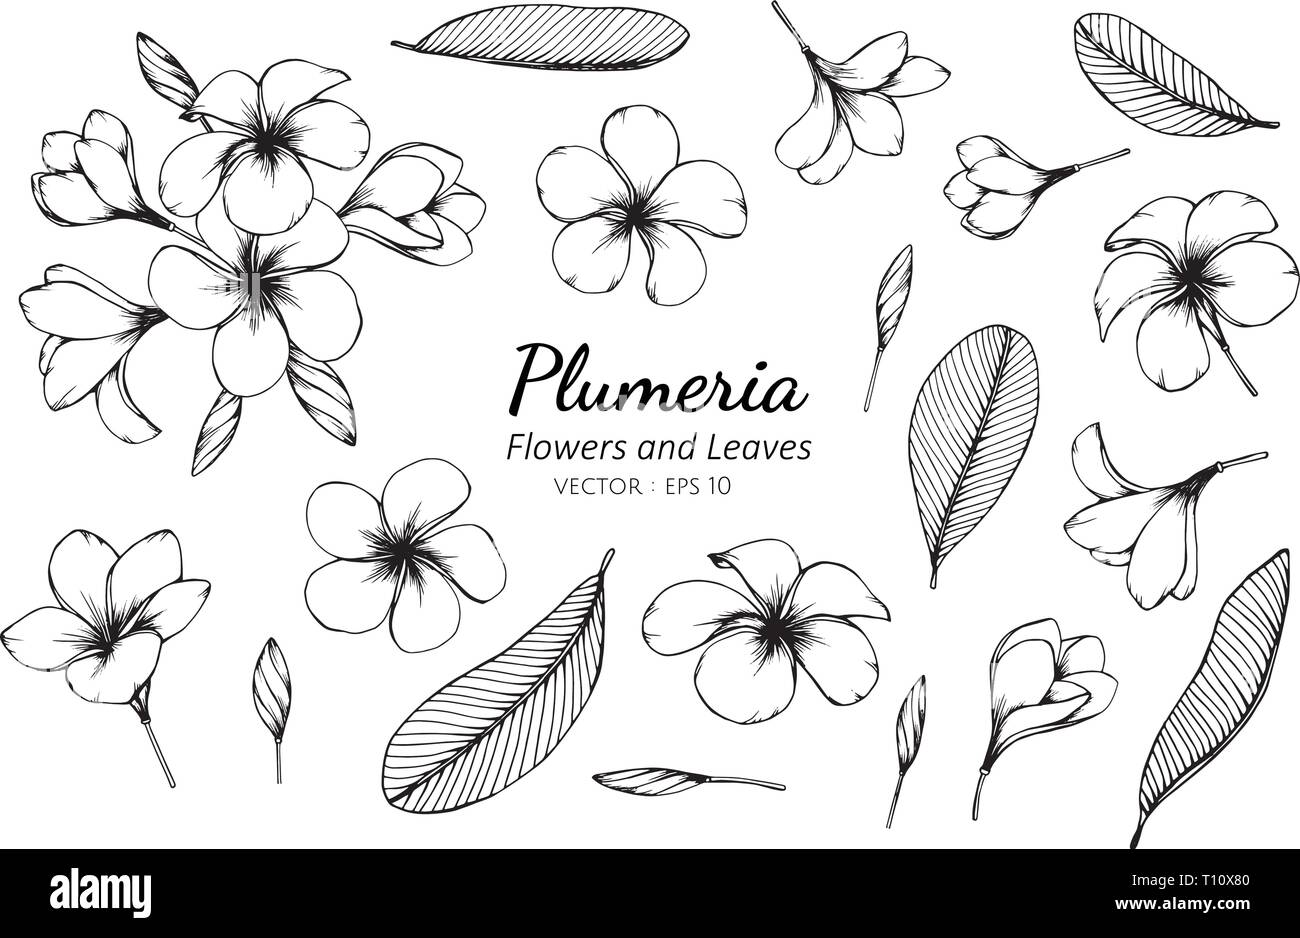 The Meaning Behind Plumeria Tattoos Symbolism and Significance  Impeccable  Nest